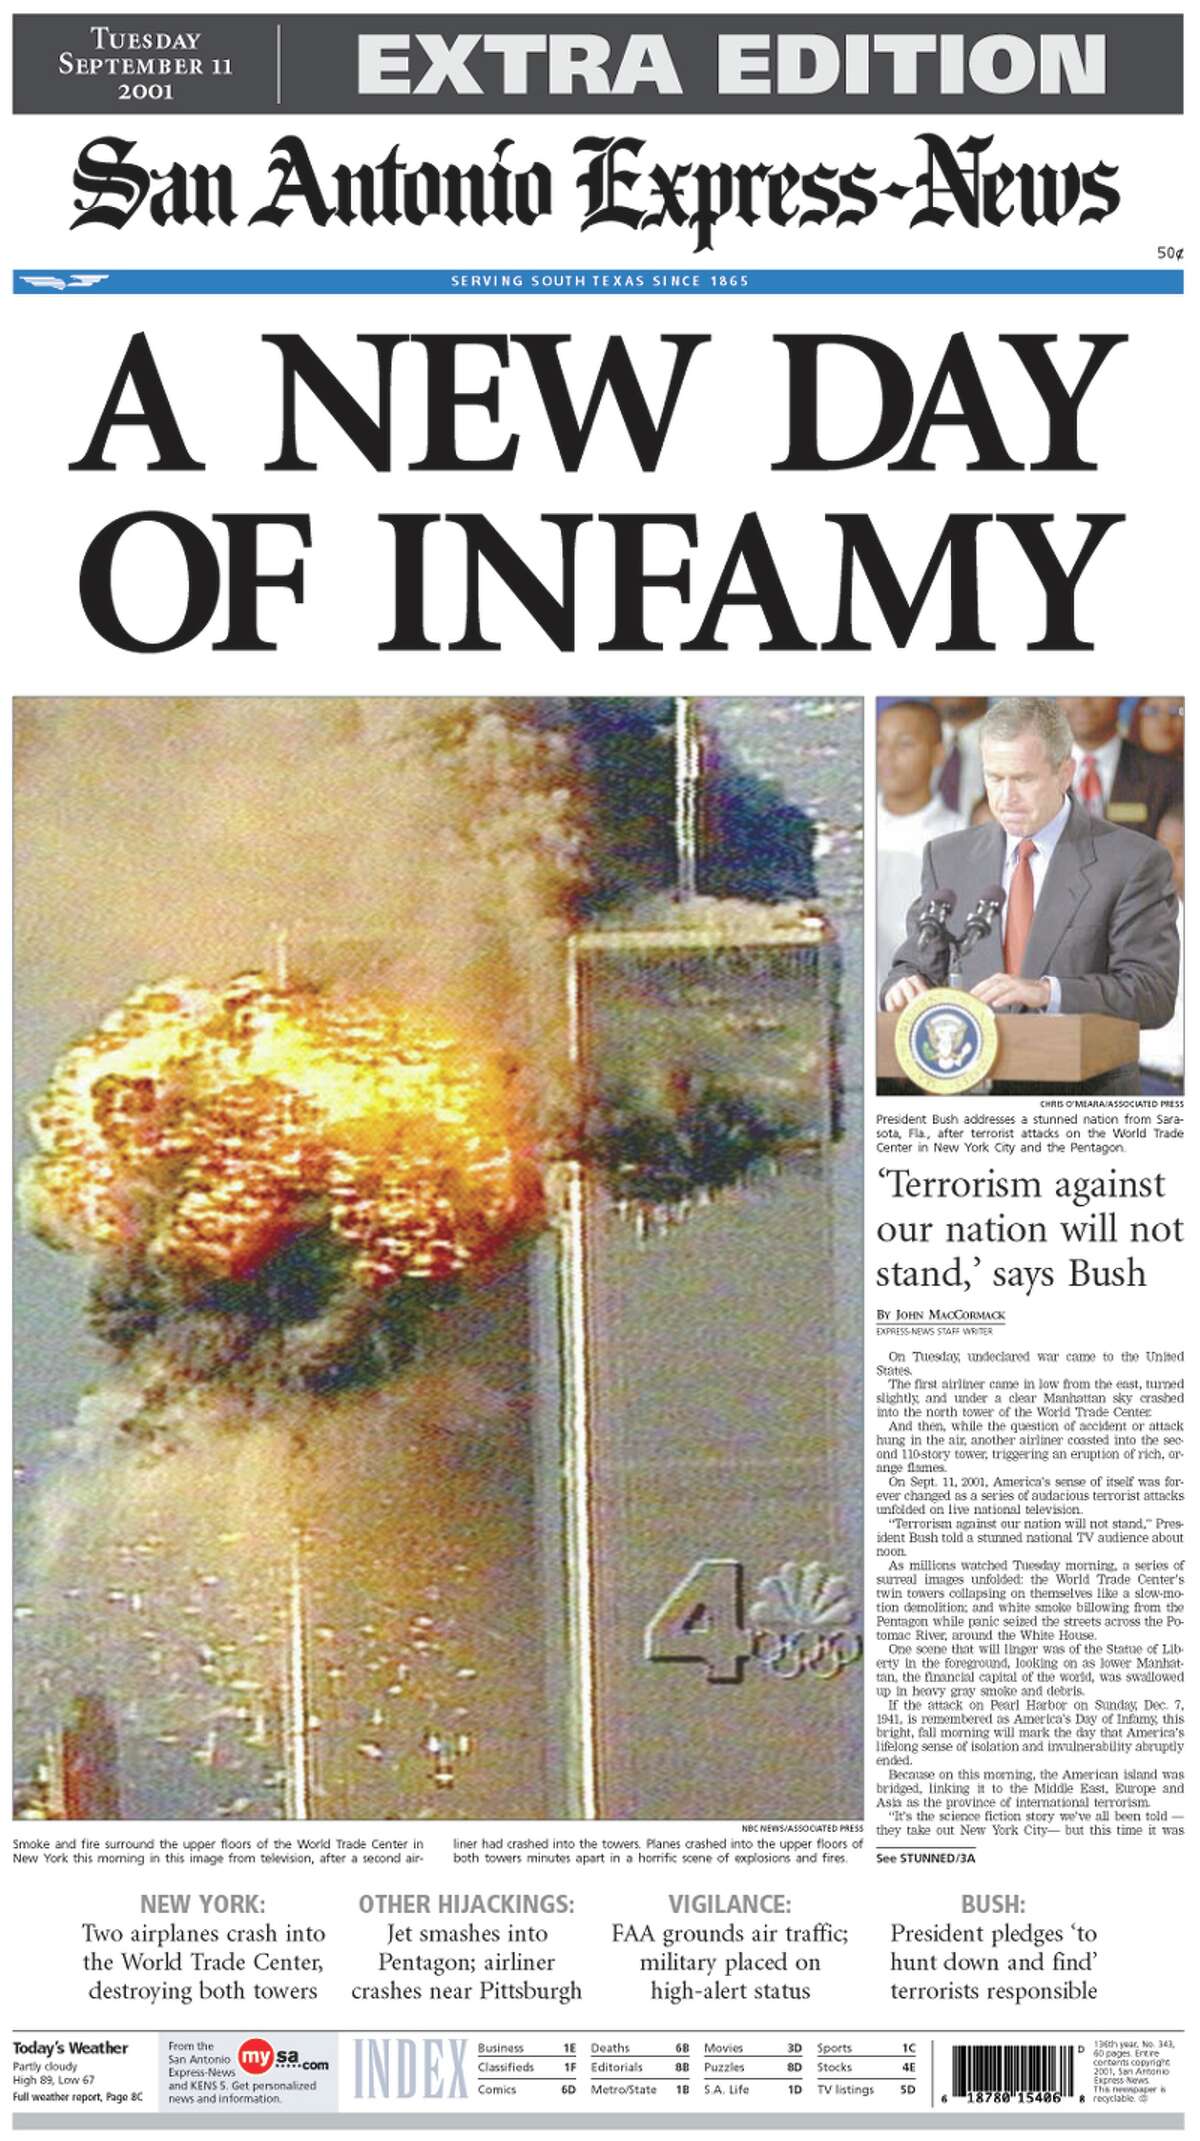 San Antonio Express-News September 11, 2001 Extra Edition front page. Headline: "A New Day of Infamy."